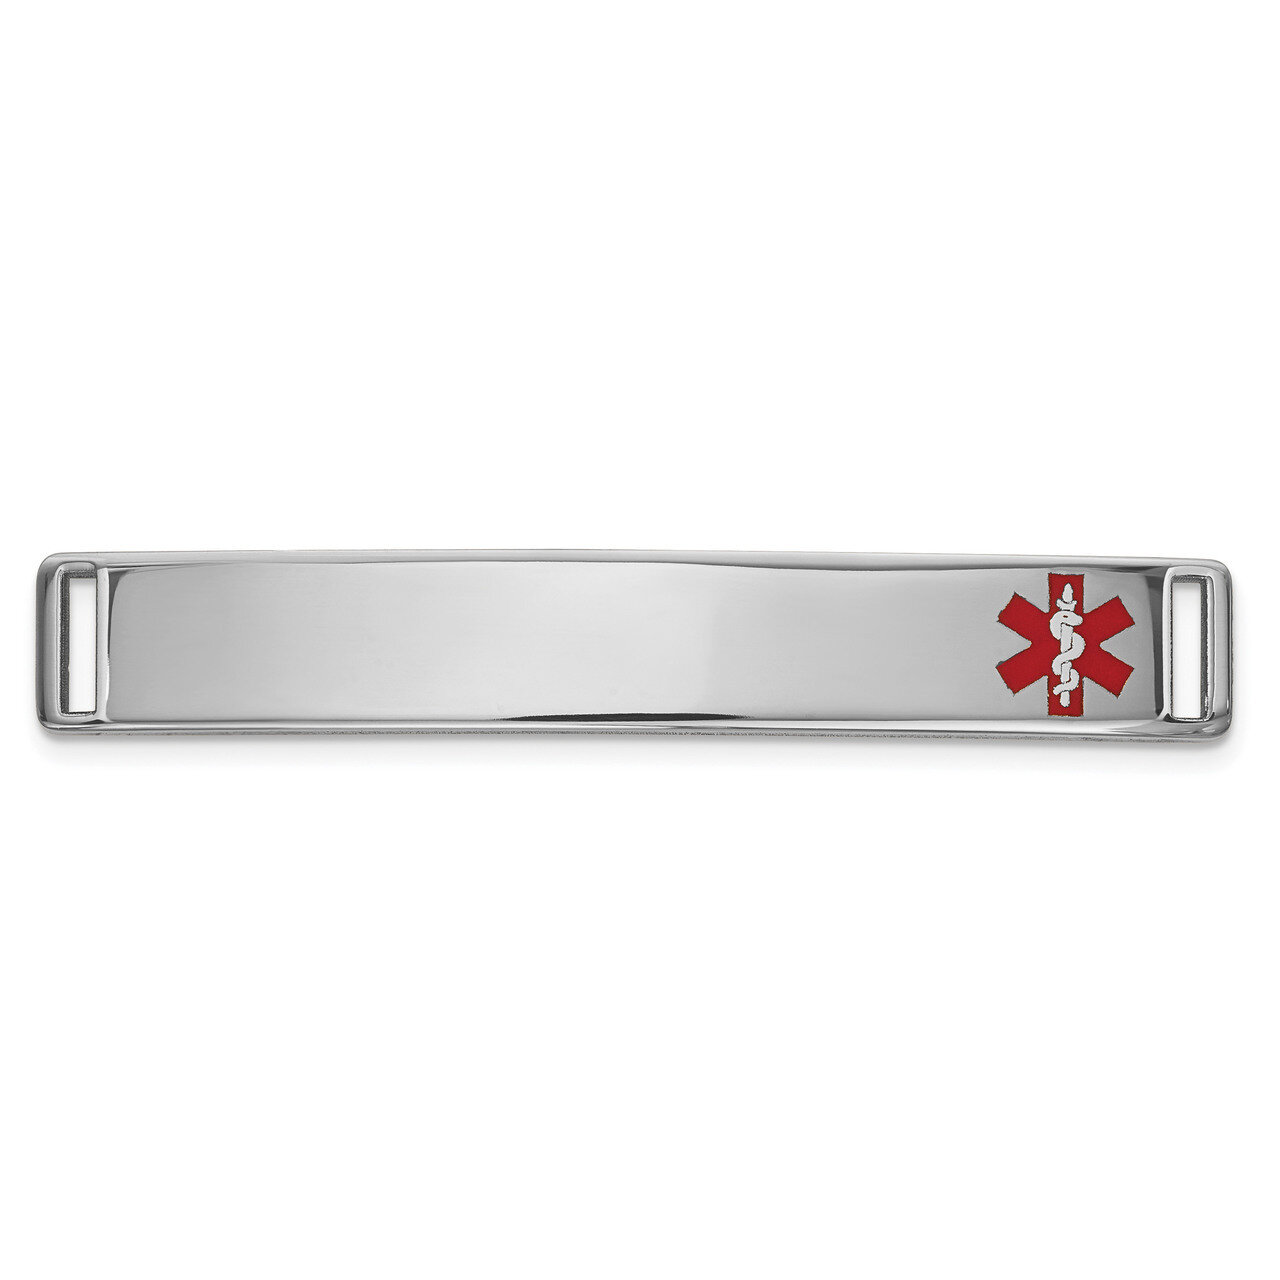 Epoxy Enameled Medical ID Off Ctr Plate # 818 14k white Gold XM650W